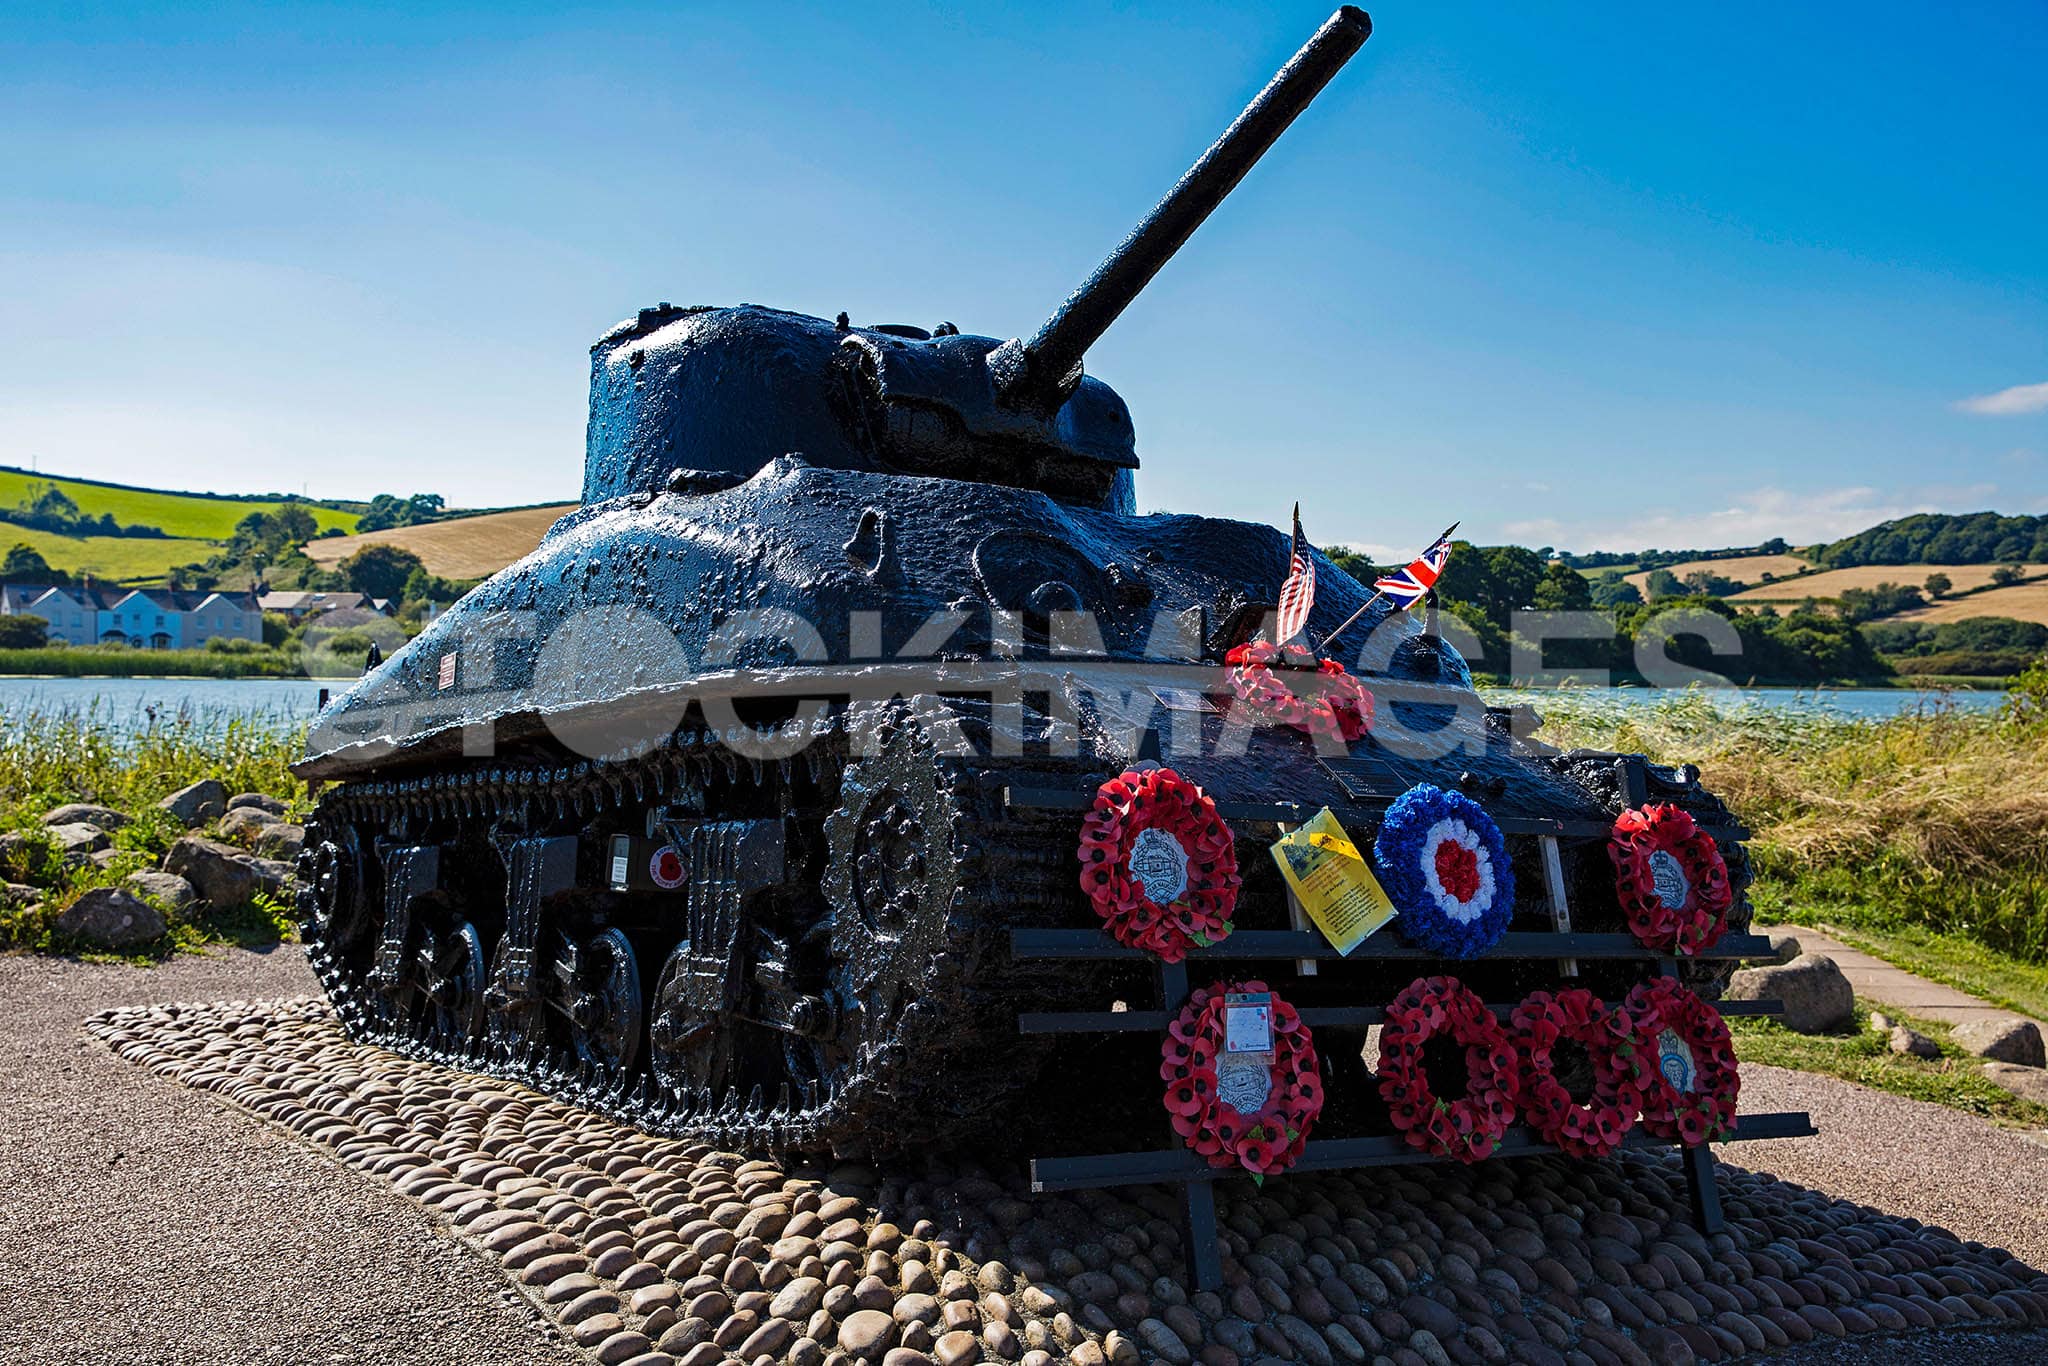 Sherman Tank Memorial at Torcross, remembering the story of D-Day in World War II.